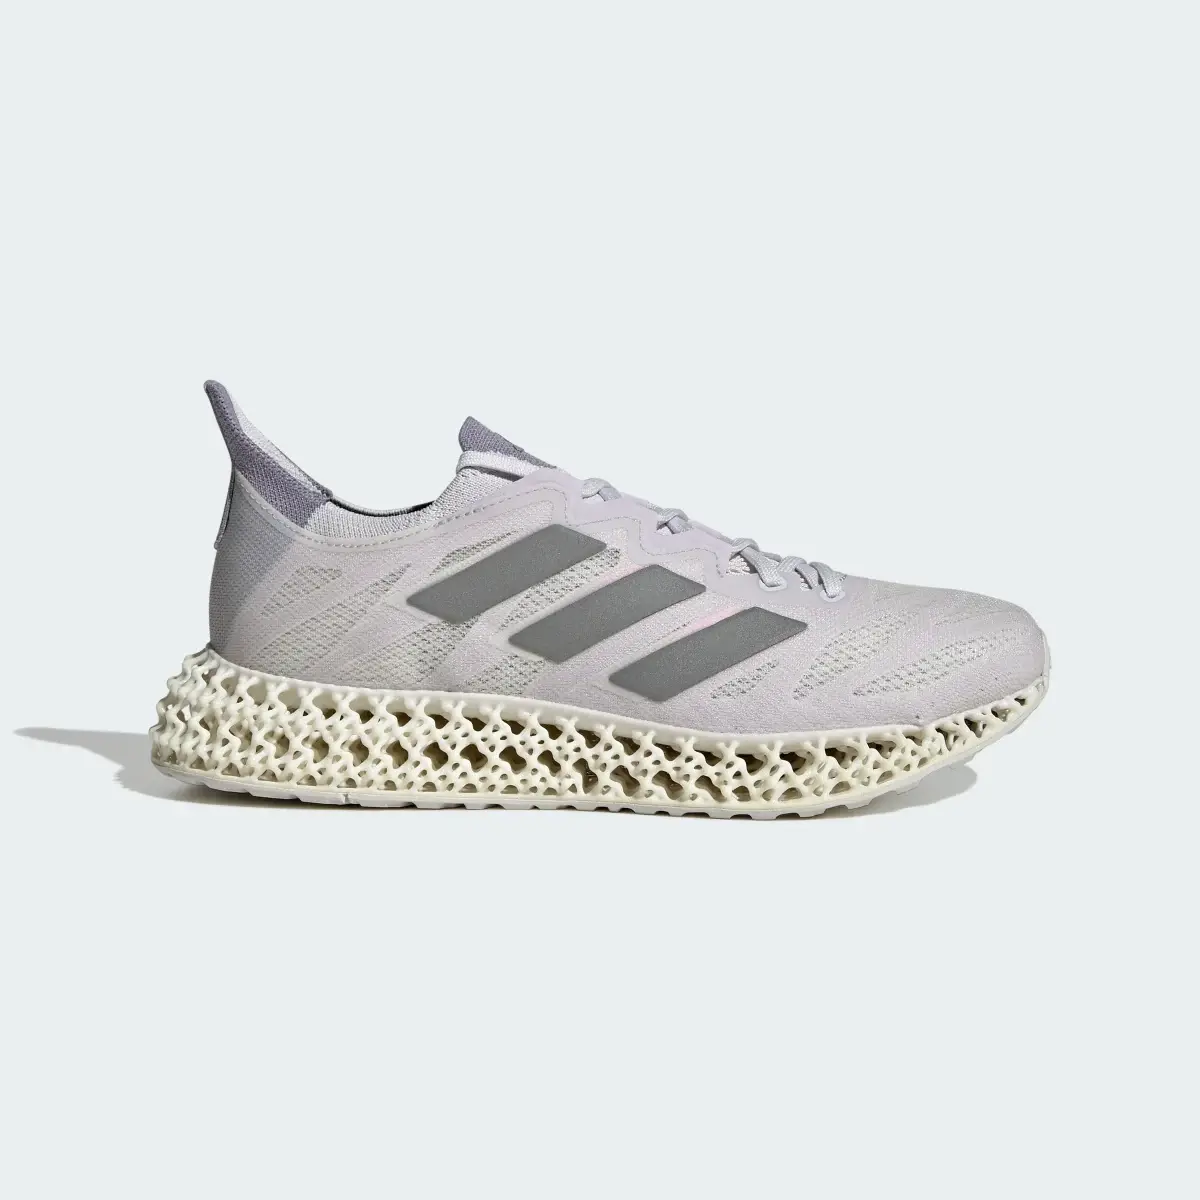 Adidas 4DFWD 3 Running Shoes. 2